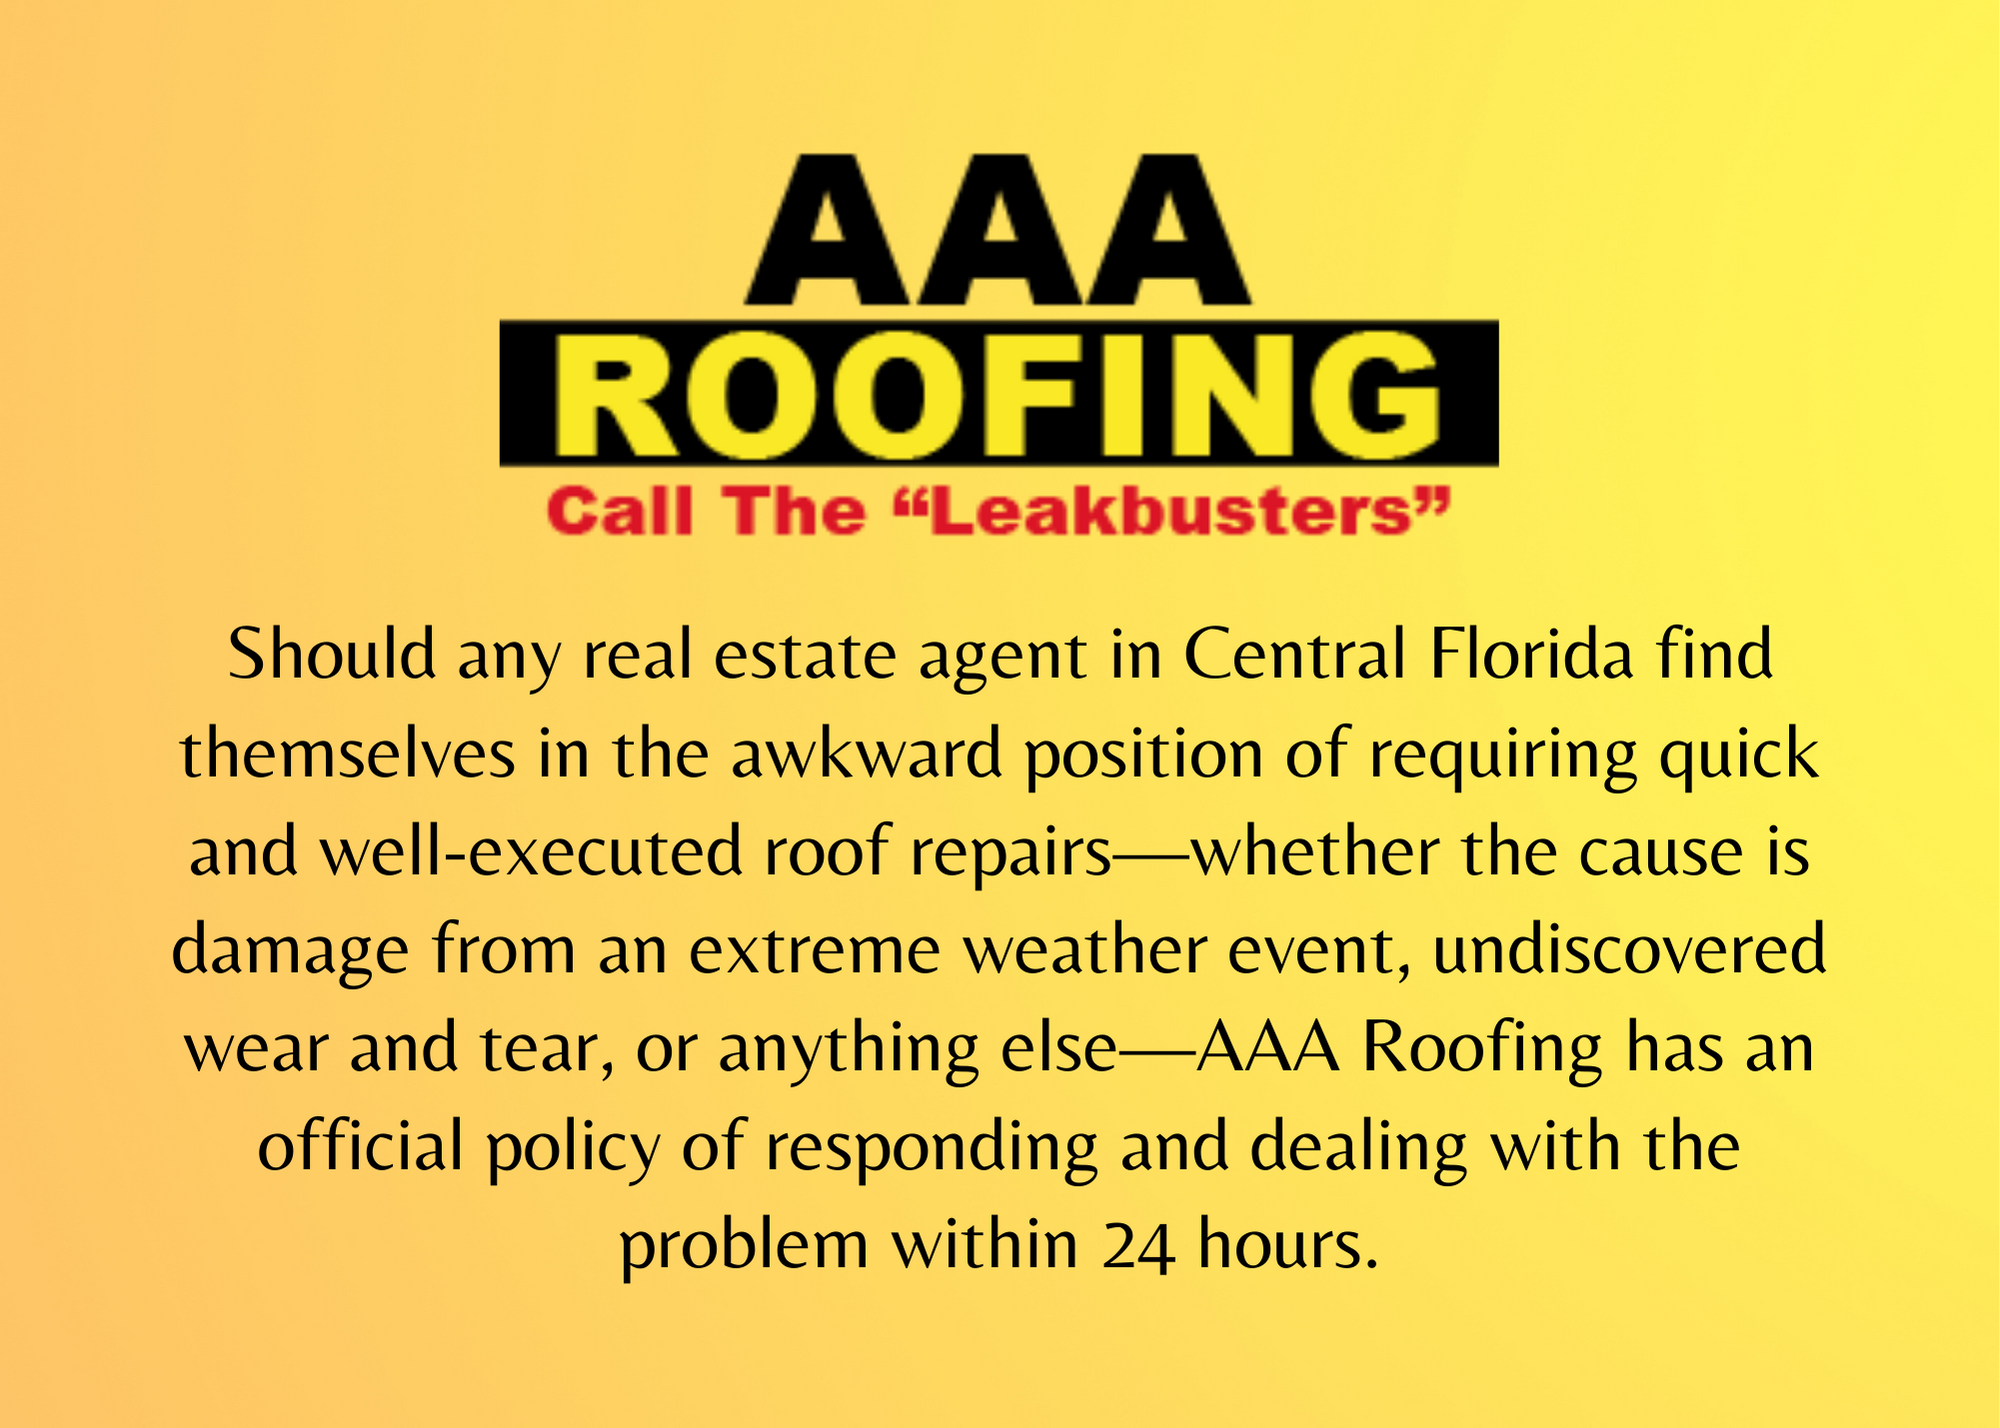 AAA Roofing, Monday, November 14, 2022, Press release picture